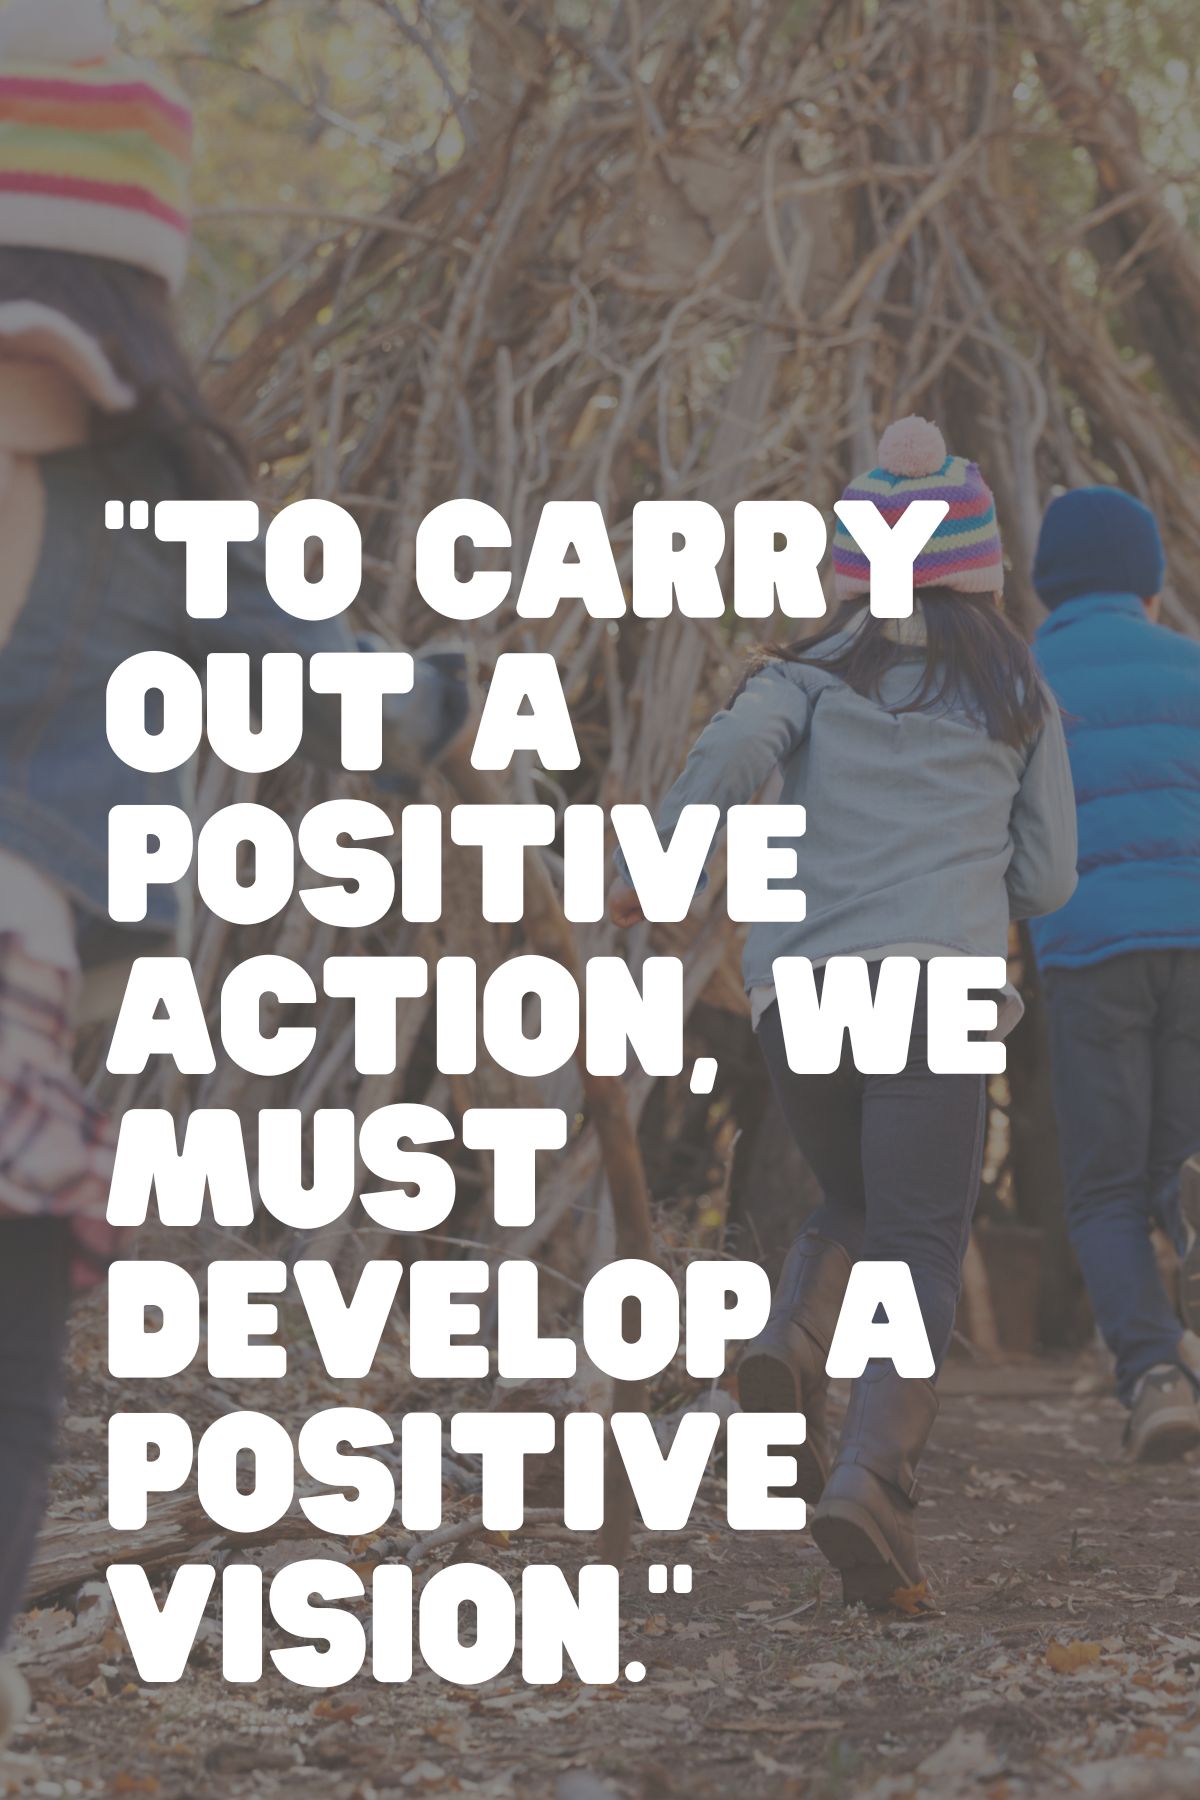 “To carry out a positive action, we must develop a positive vision.” – Dalai Lama